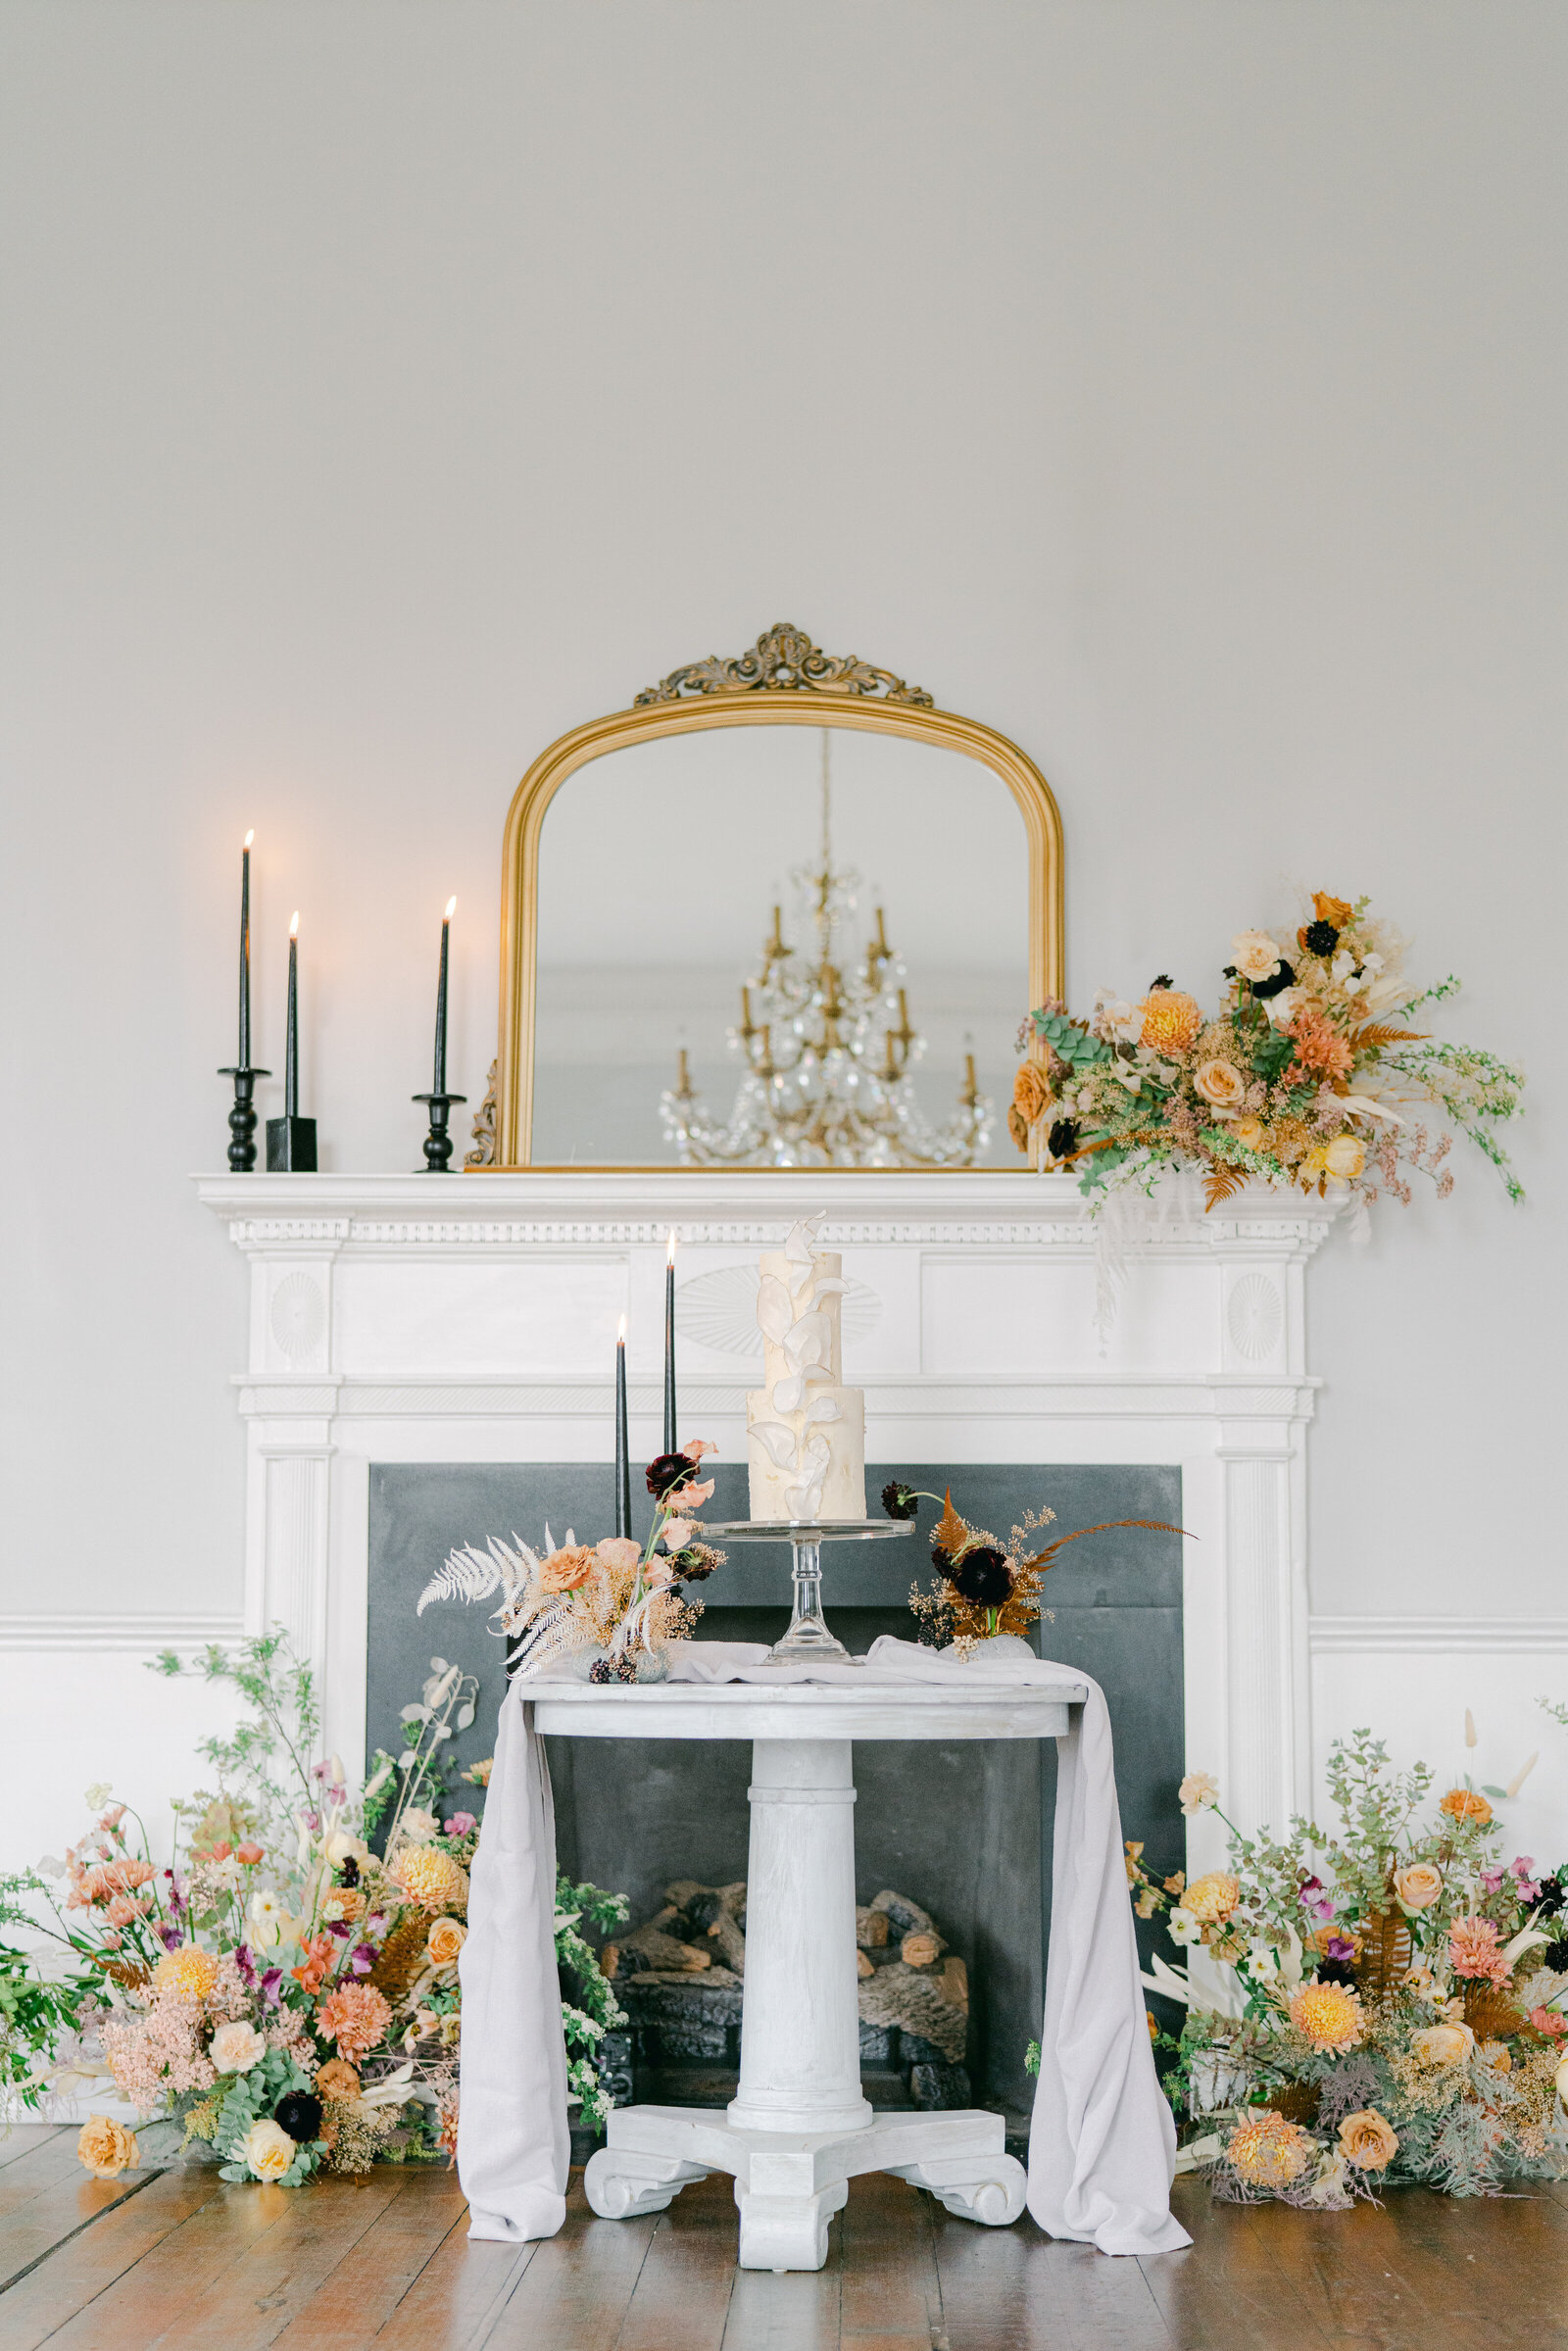 wedding cake on a stand in front of mantel with floral arrangements all around